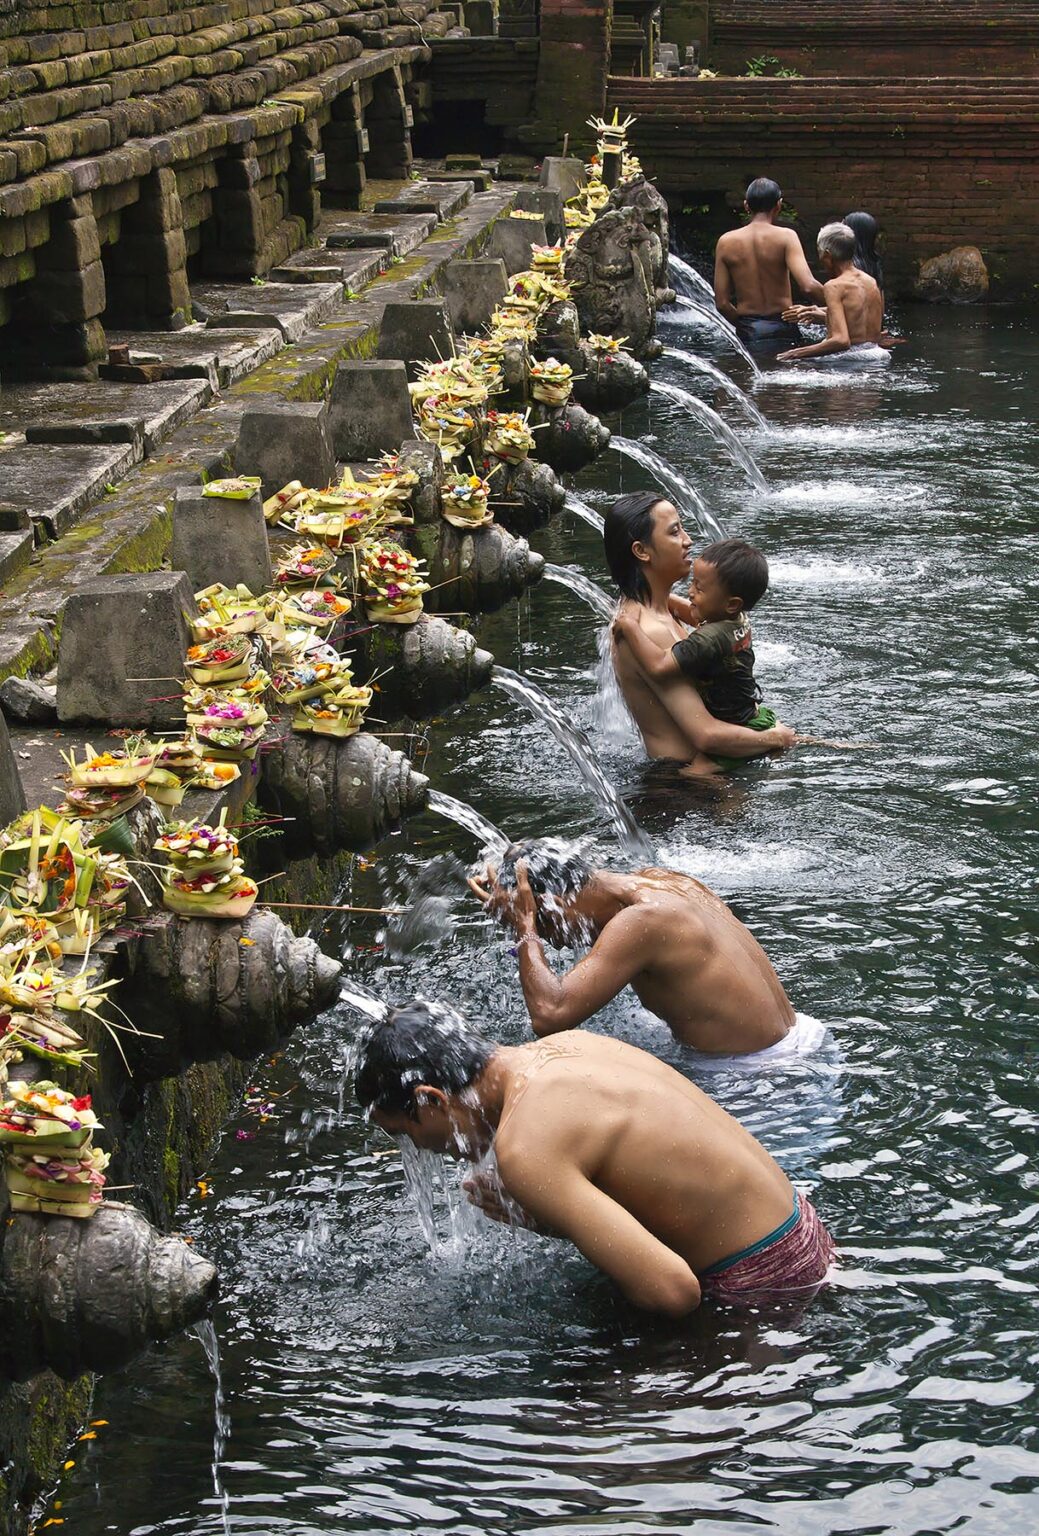 BALINESE purify themselves by bathing at PURA TIRTA EMPUL a Hindu Temple complex and cold springs with healing waters - TAMPAKSIRING, BALI, INDONESIA